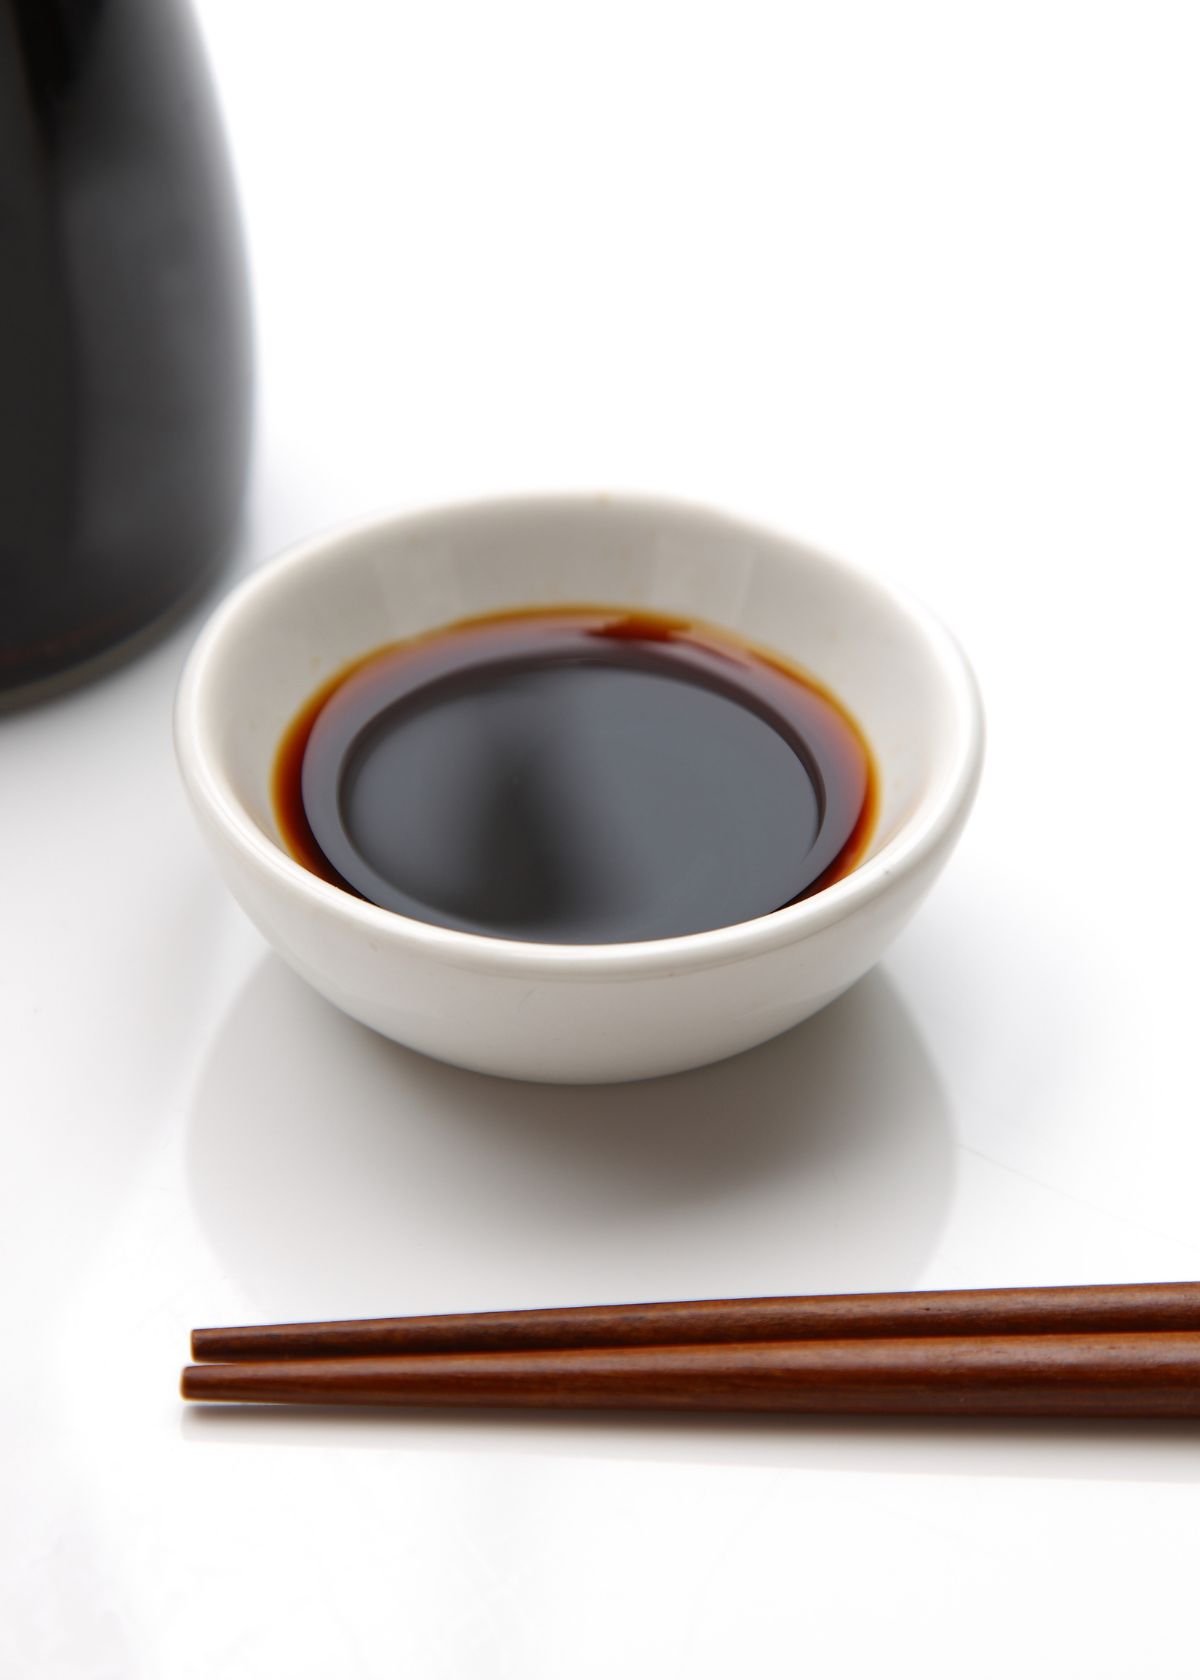 How to Remove Soy Sauce Stains